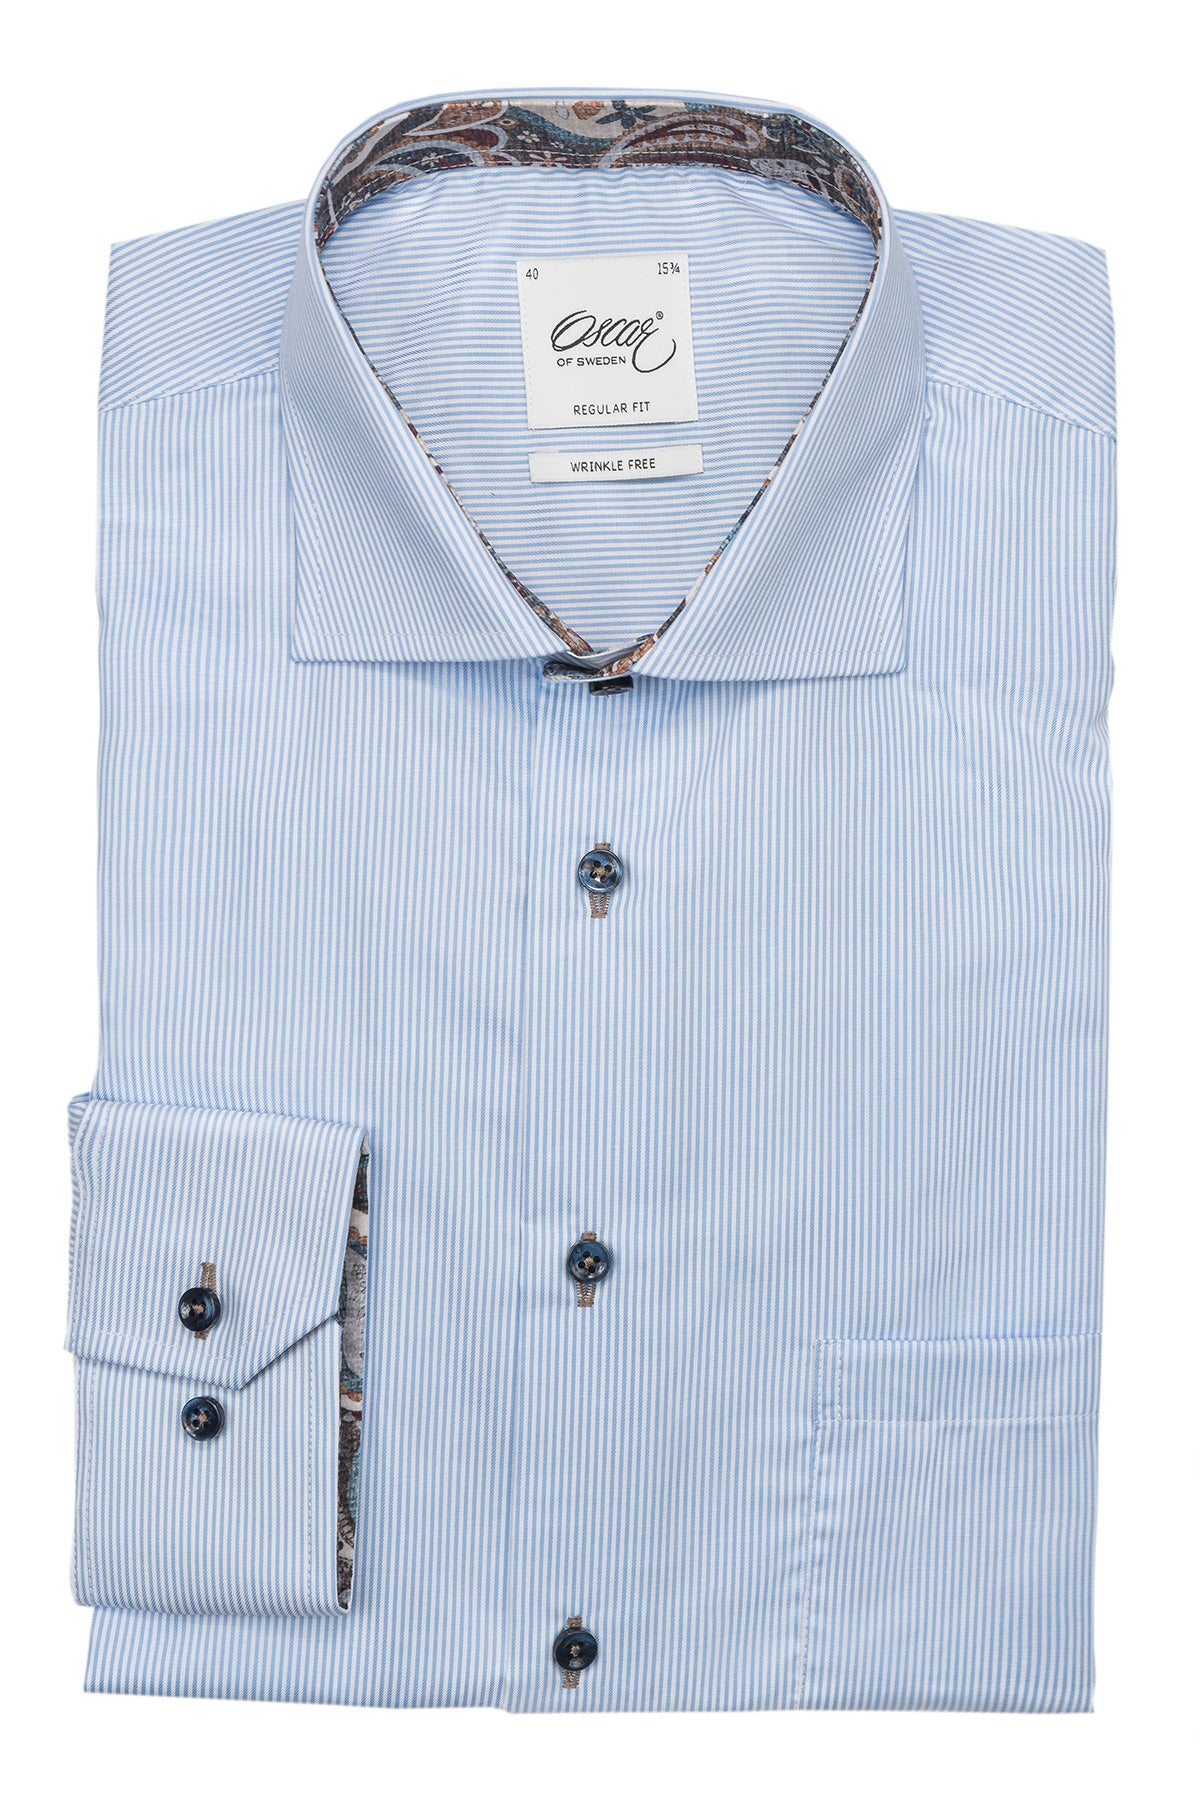 Light blue striped regular fit extra long sleeve shirt with contrast details